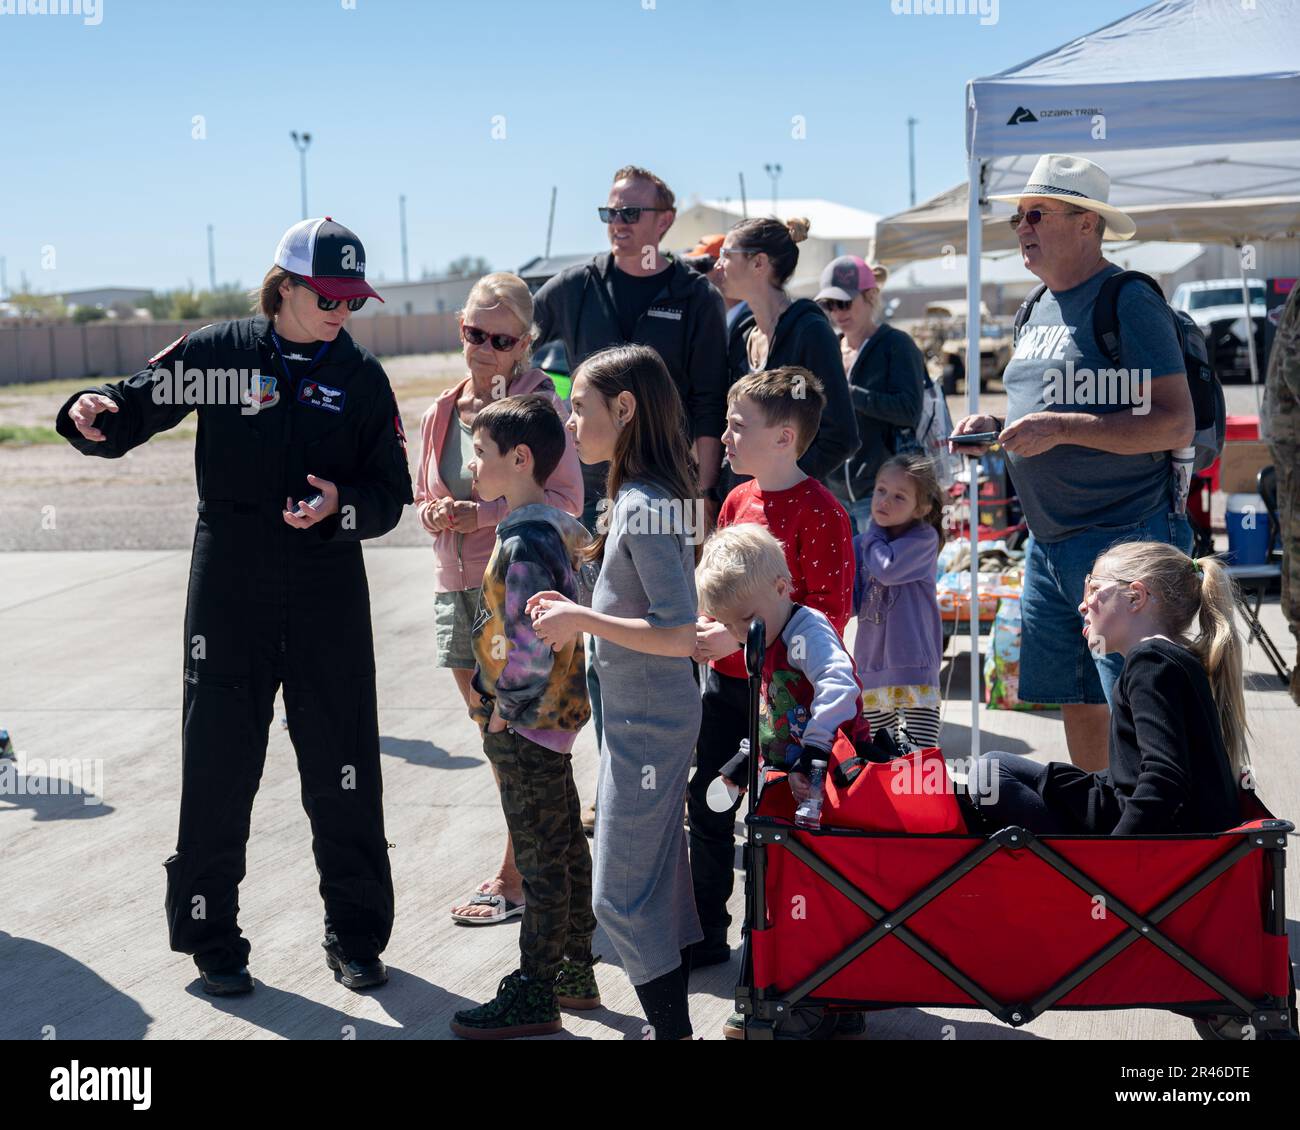 U.S. Air Force Capt. Lindsay “MAD” Johnson, A-10C Thunderbolt II Demonstration team commander and pilot, interacts with air show attendees at Davis-Monthan Air Force Base, Arizona, March 26, 2023. The airshow was open to the public as a way to connect the base and local community while also highlighting the mission and capabilities of the U.S. Air Force. Stock Photo